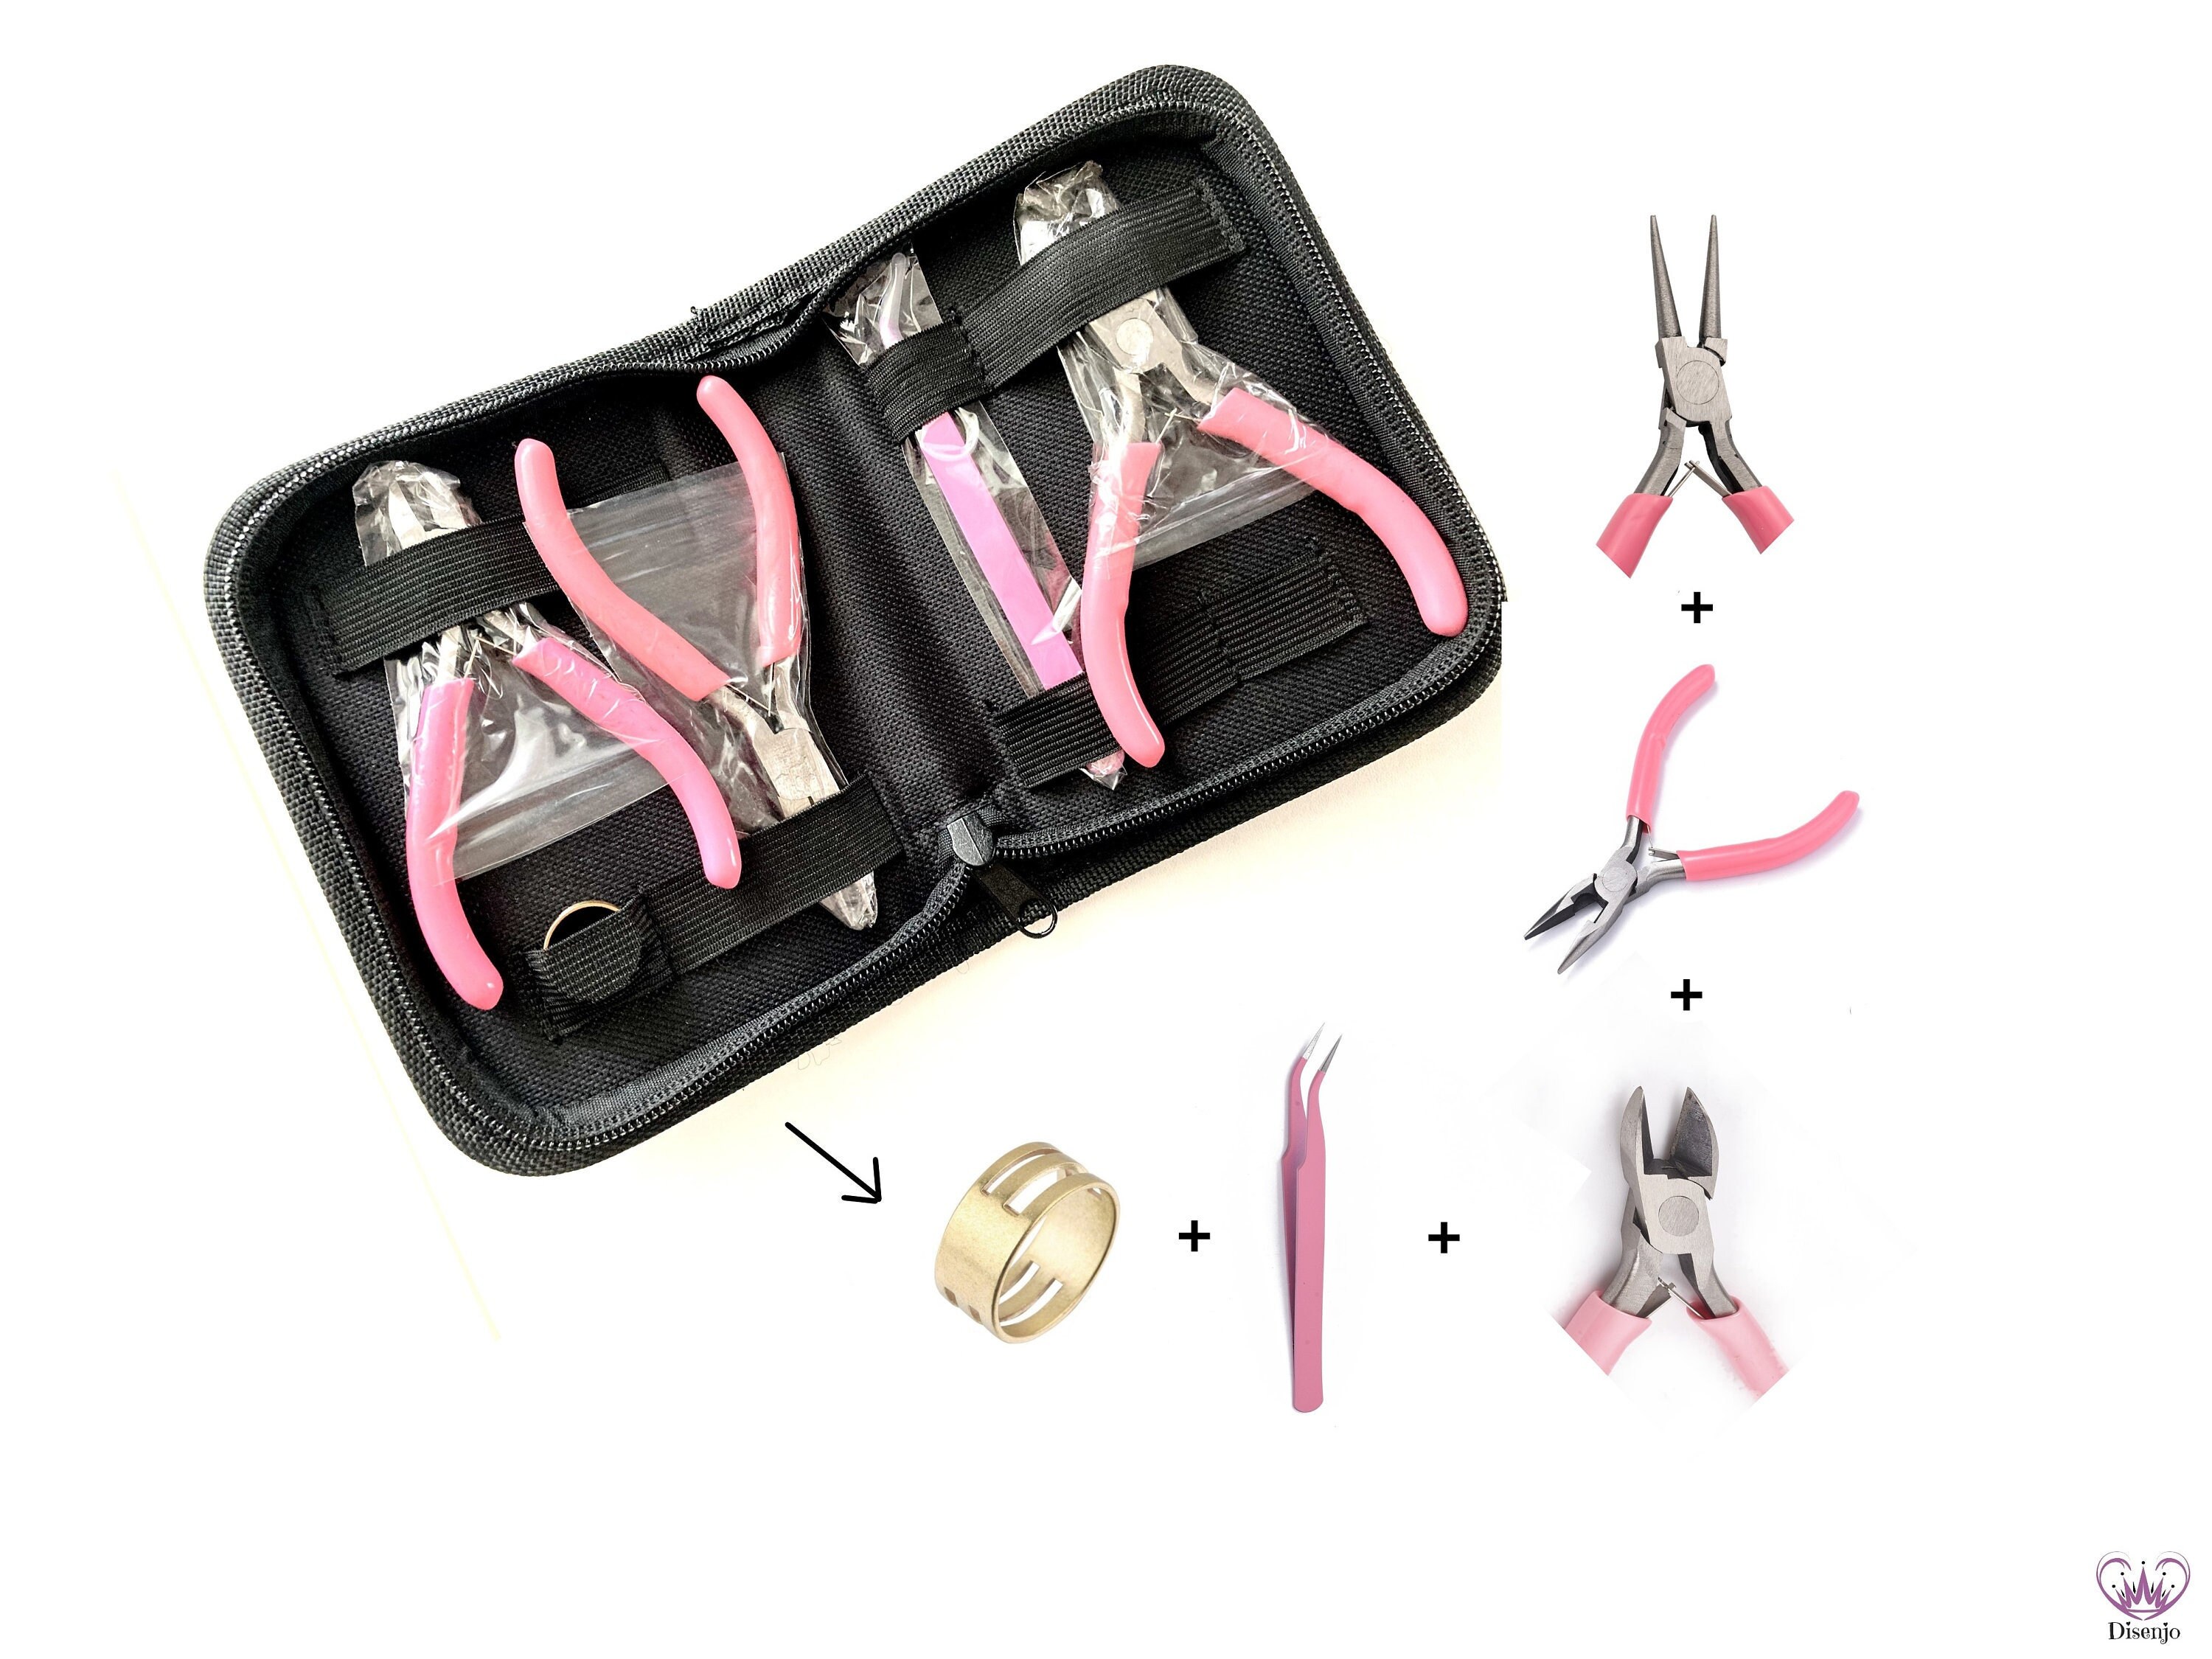 Jewelry Pliers Set, Jewelry Making Tools, Mini Pliers Kit With Wood Pallet,  Pliers for Jewelry DIY Crafting Beading 